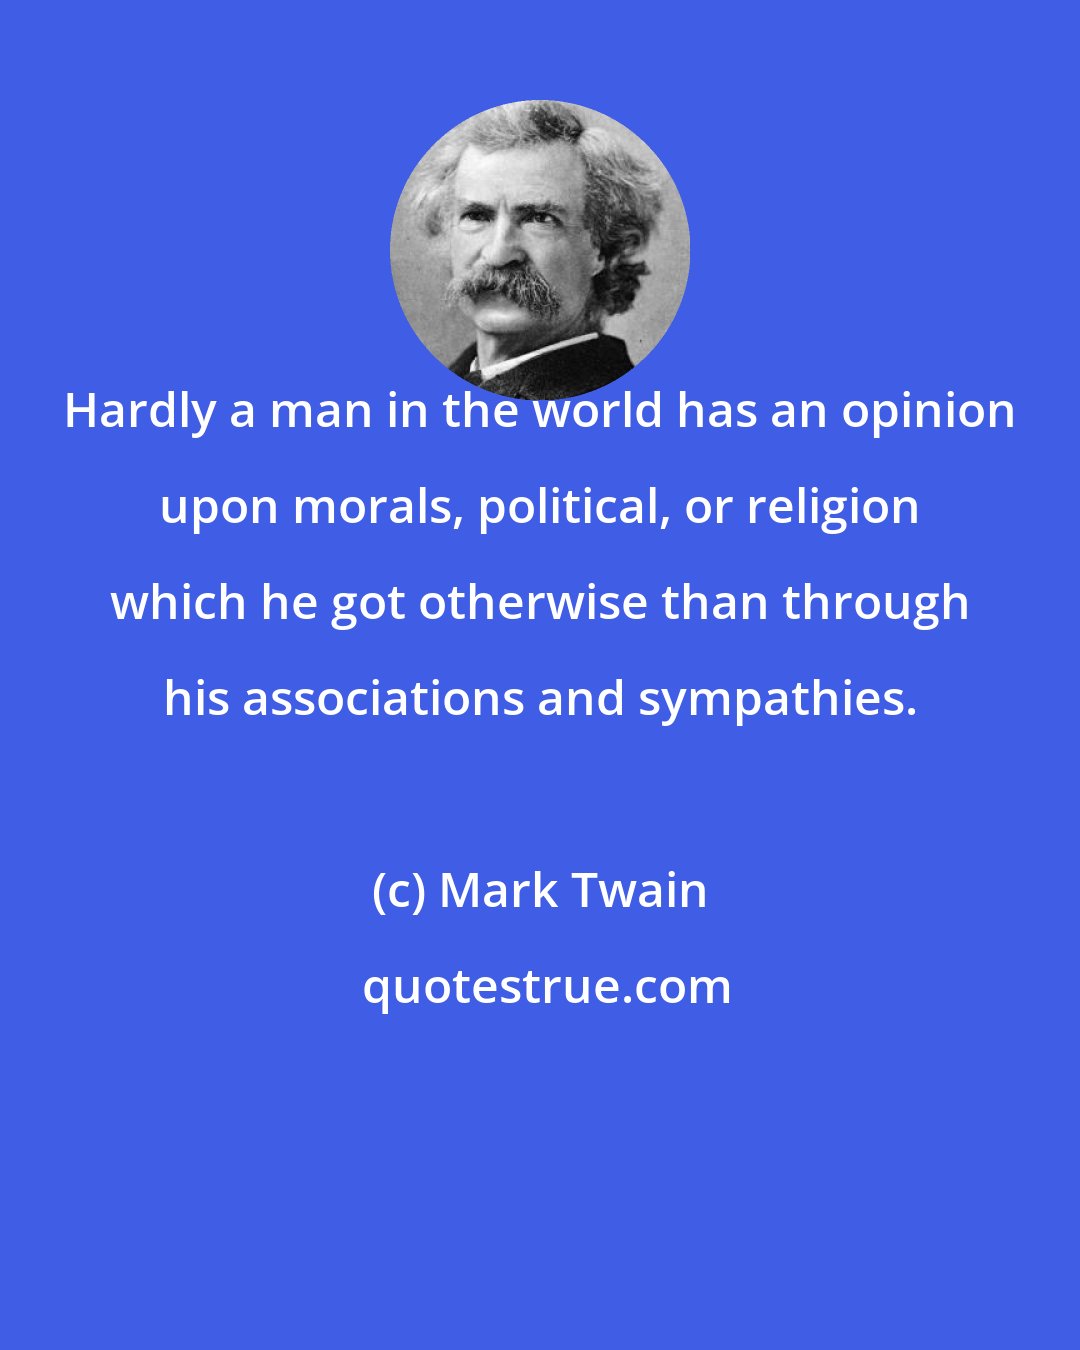 Mark Twain: Hardly a man in the world has an opinion upon morals, political, or religion which he got otherwise than through his associations and sympathies.